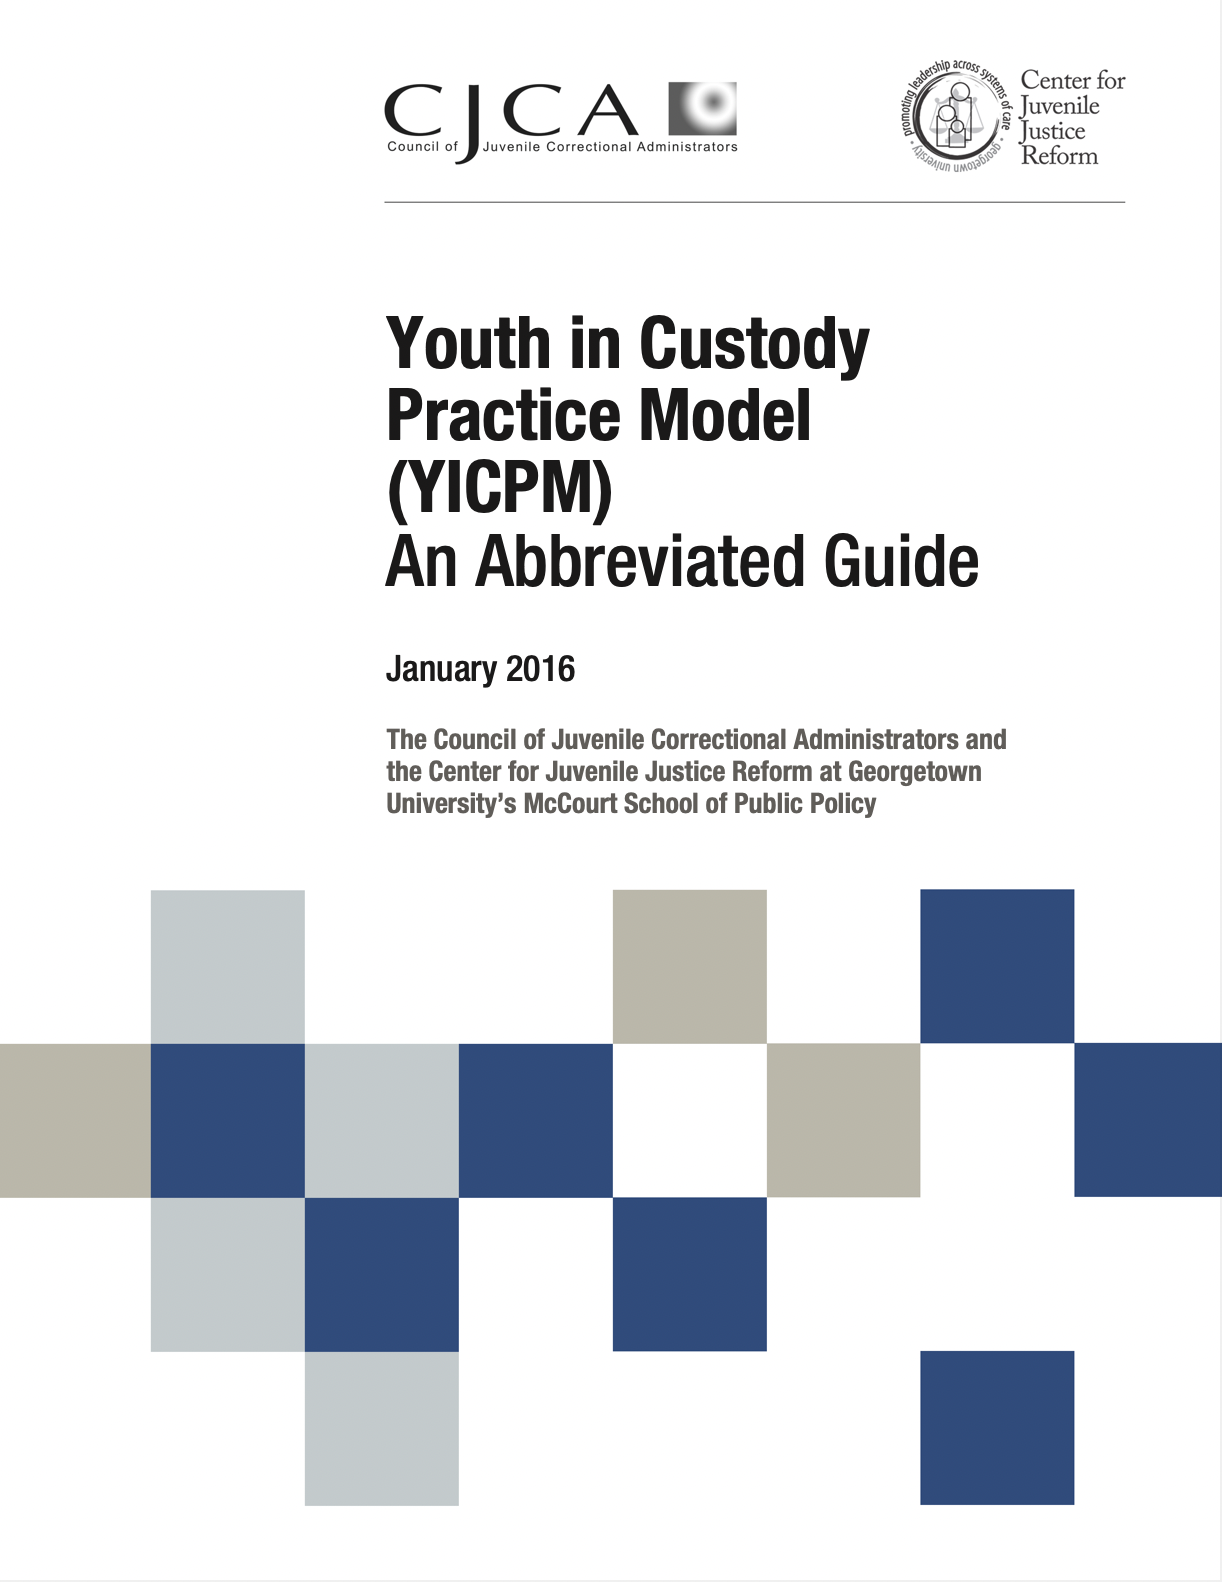 Youth in Custody Practice Model Guide cover image